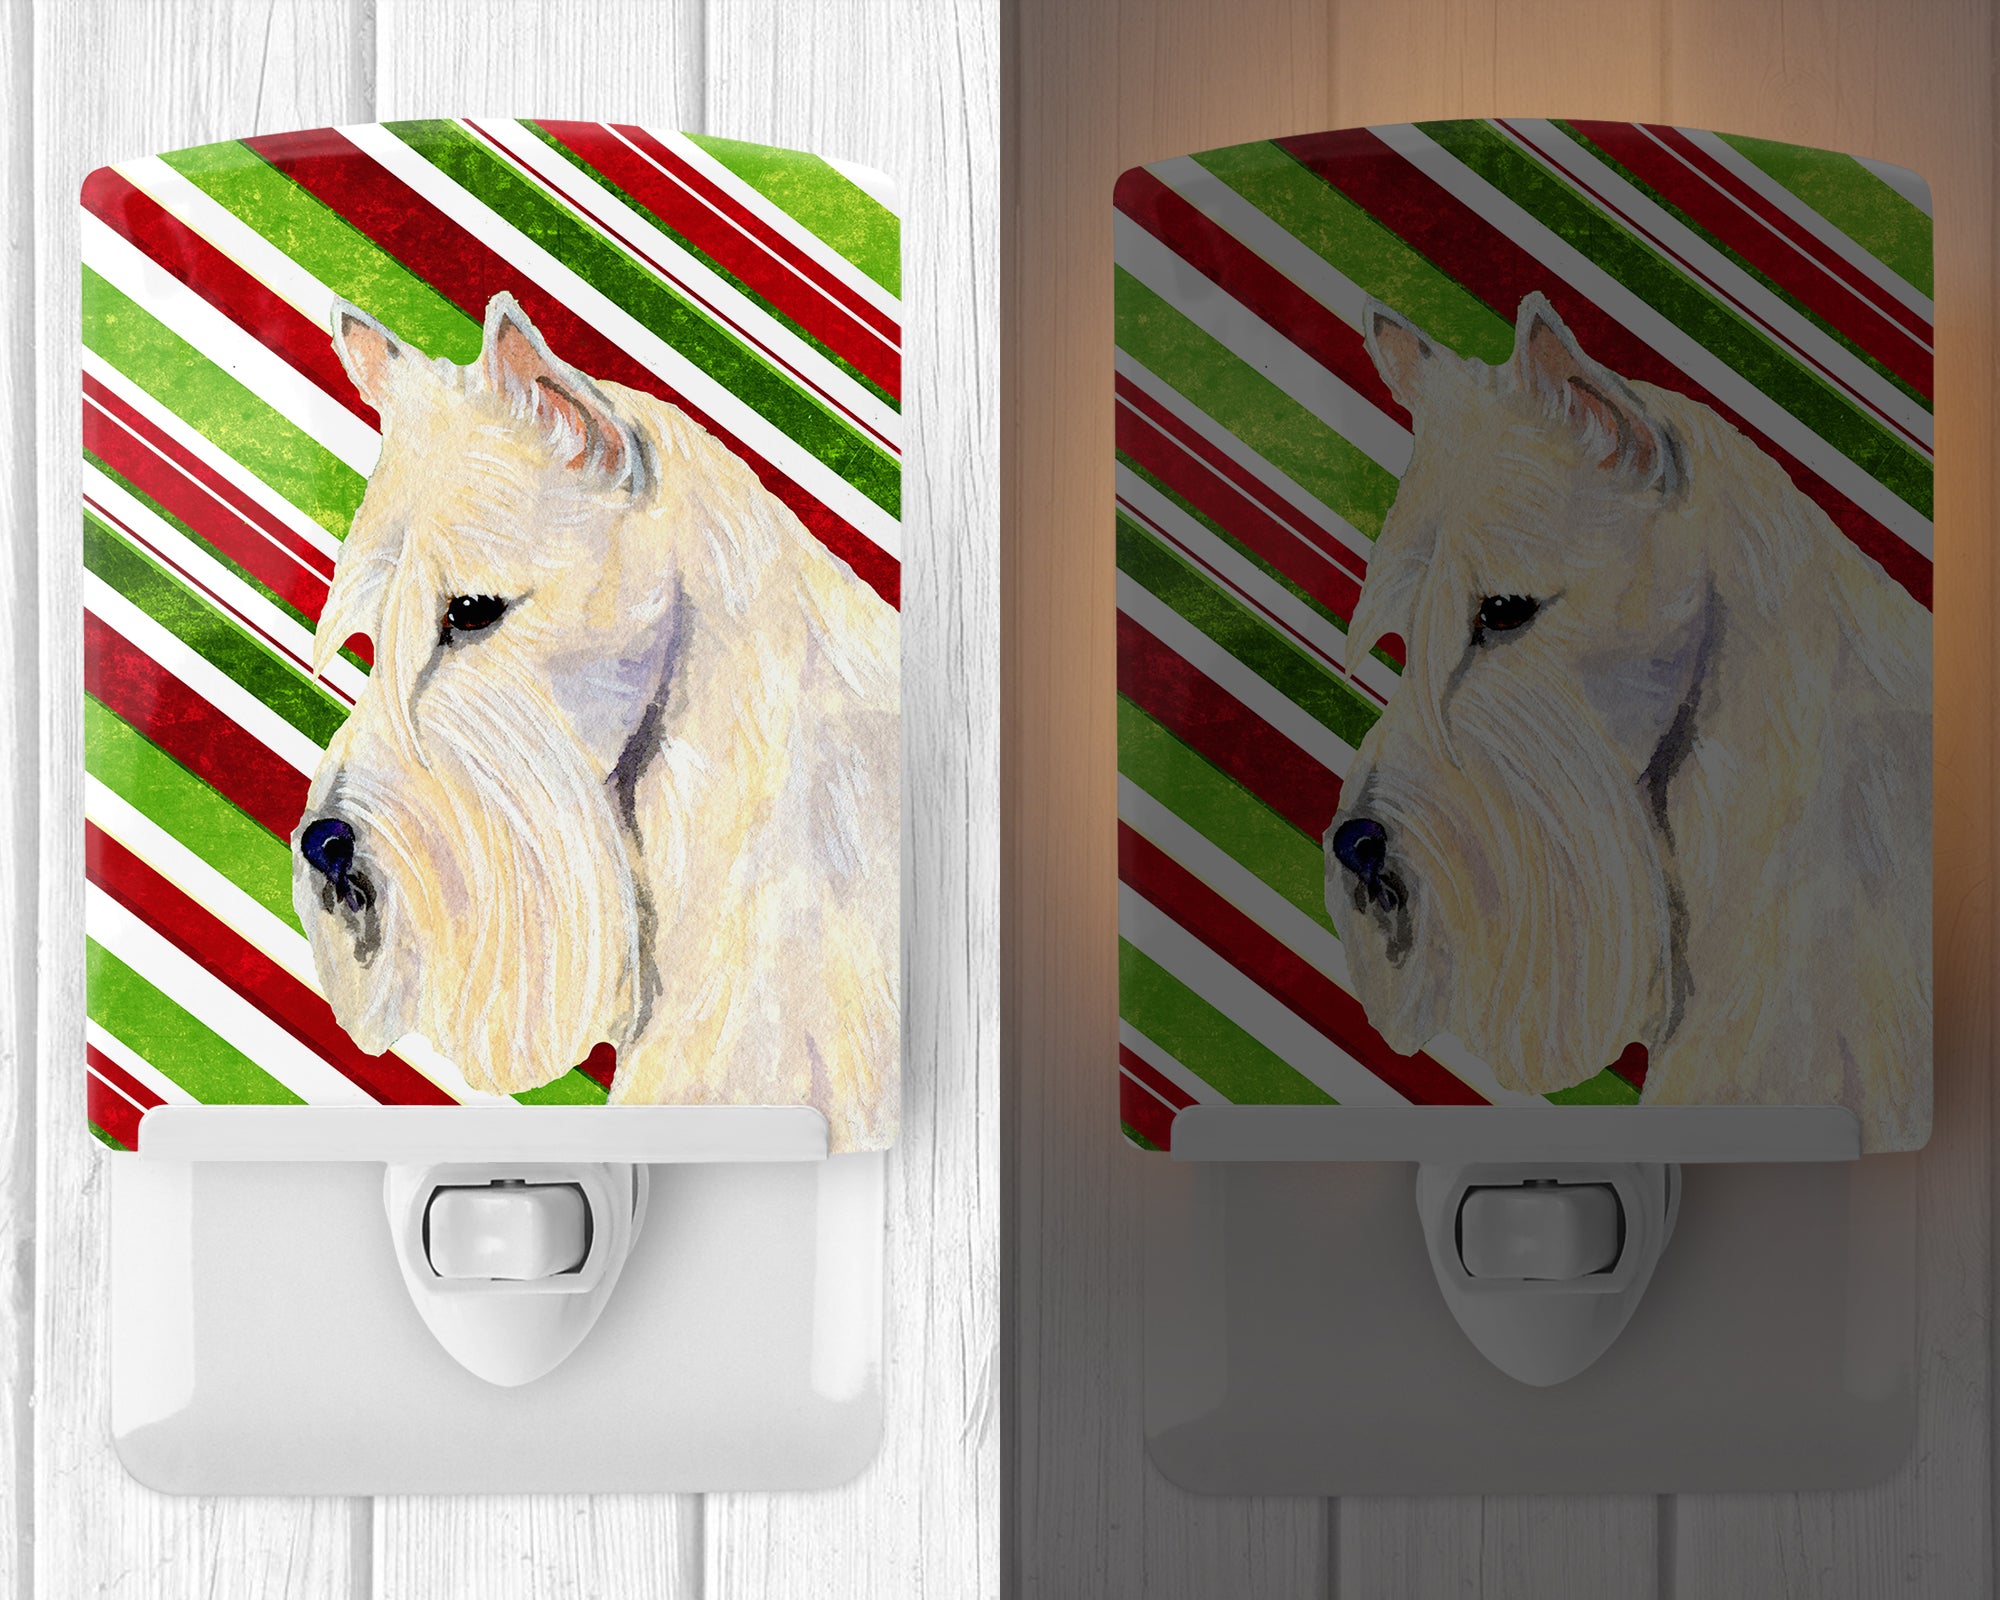 Scottish Terrier Candy Cane Holiday Christmas Ceramic Night Light SS4599CNL - the-store.com